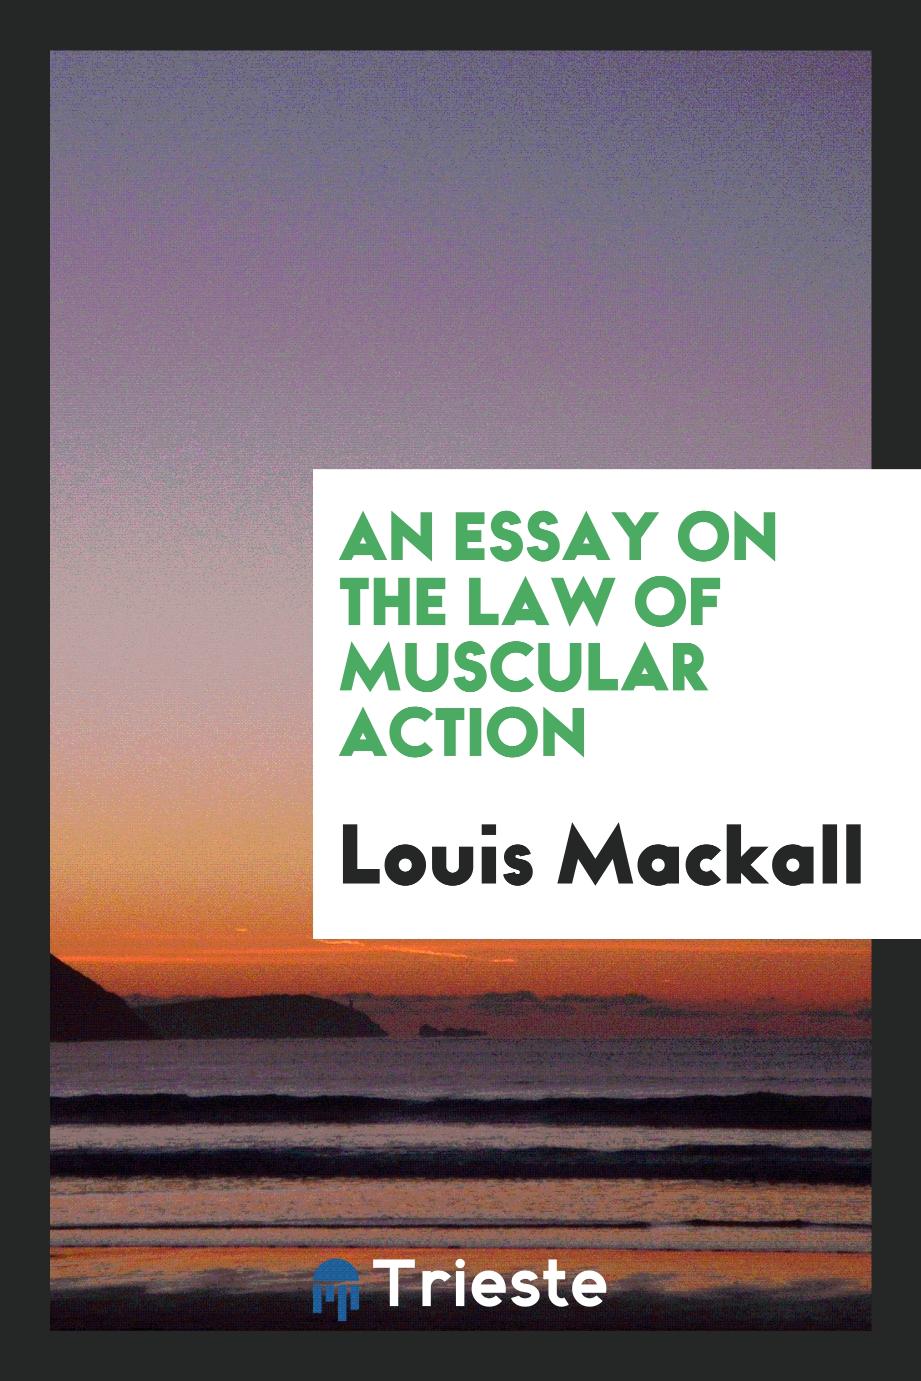 An essay on the law of muscular action